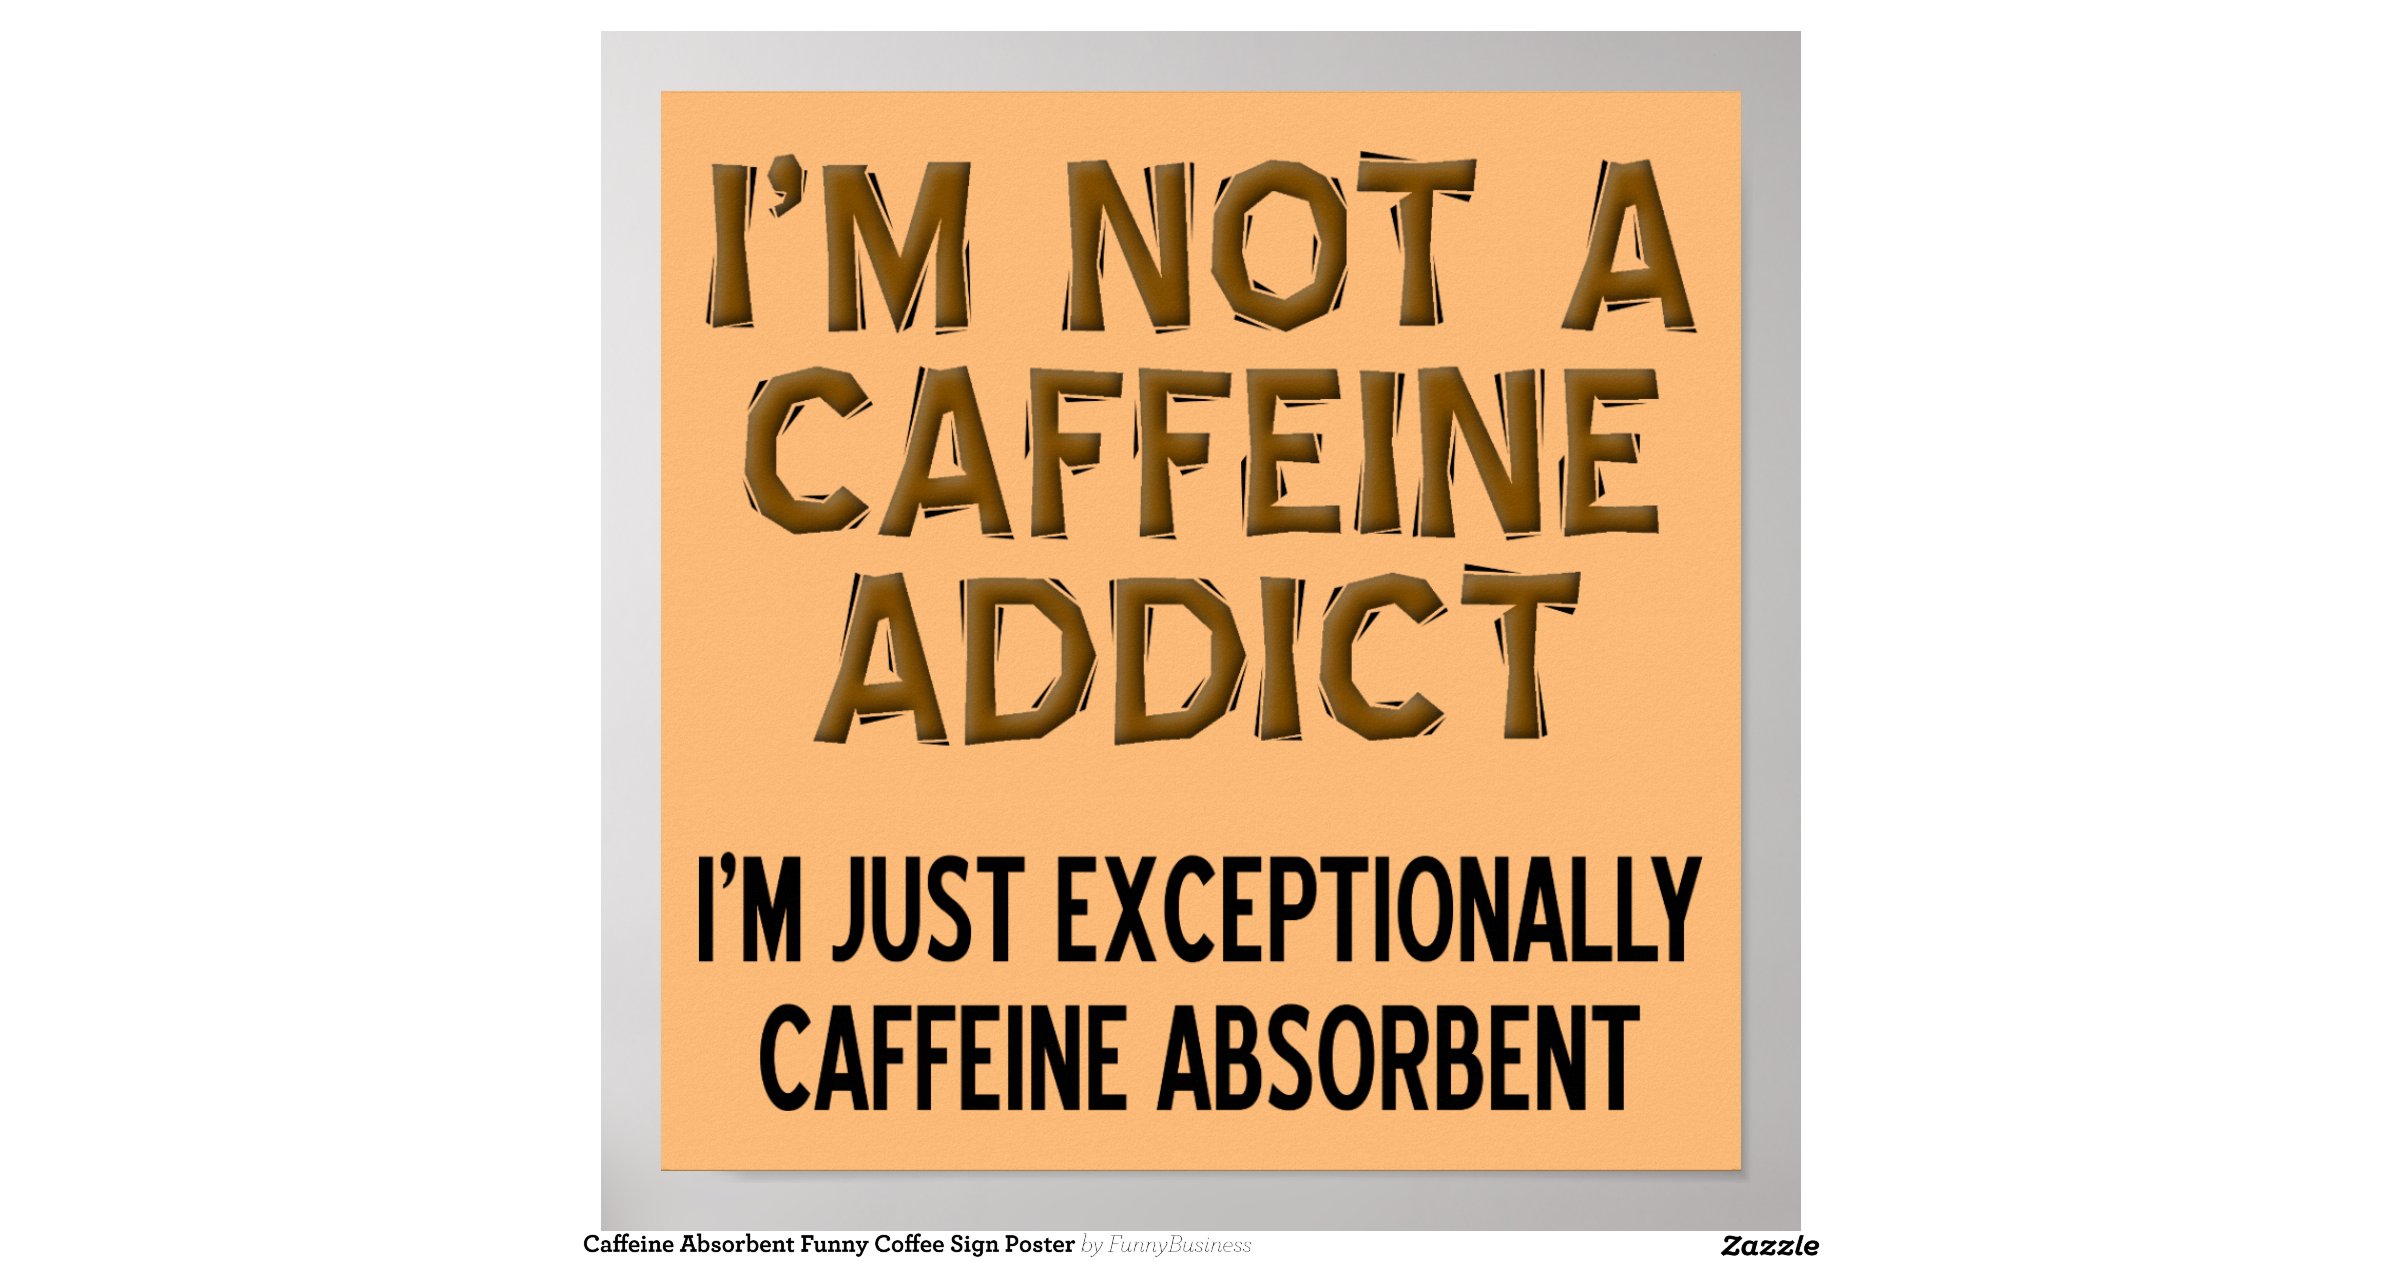 caffeine_absorbent_funny_coffee_sign_poster rc7fb96a0230a410388603a894a13221b_wvk_8byvr_1200